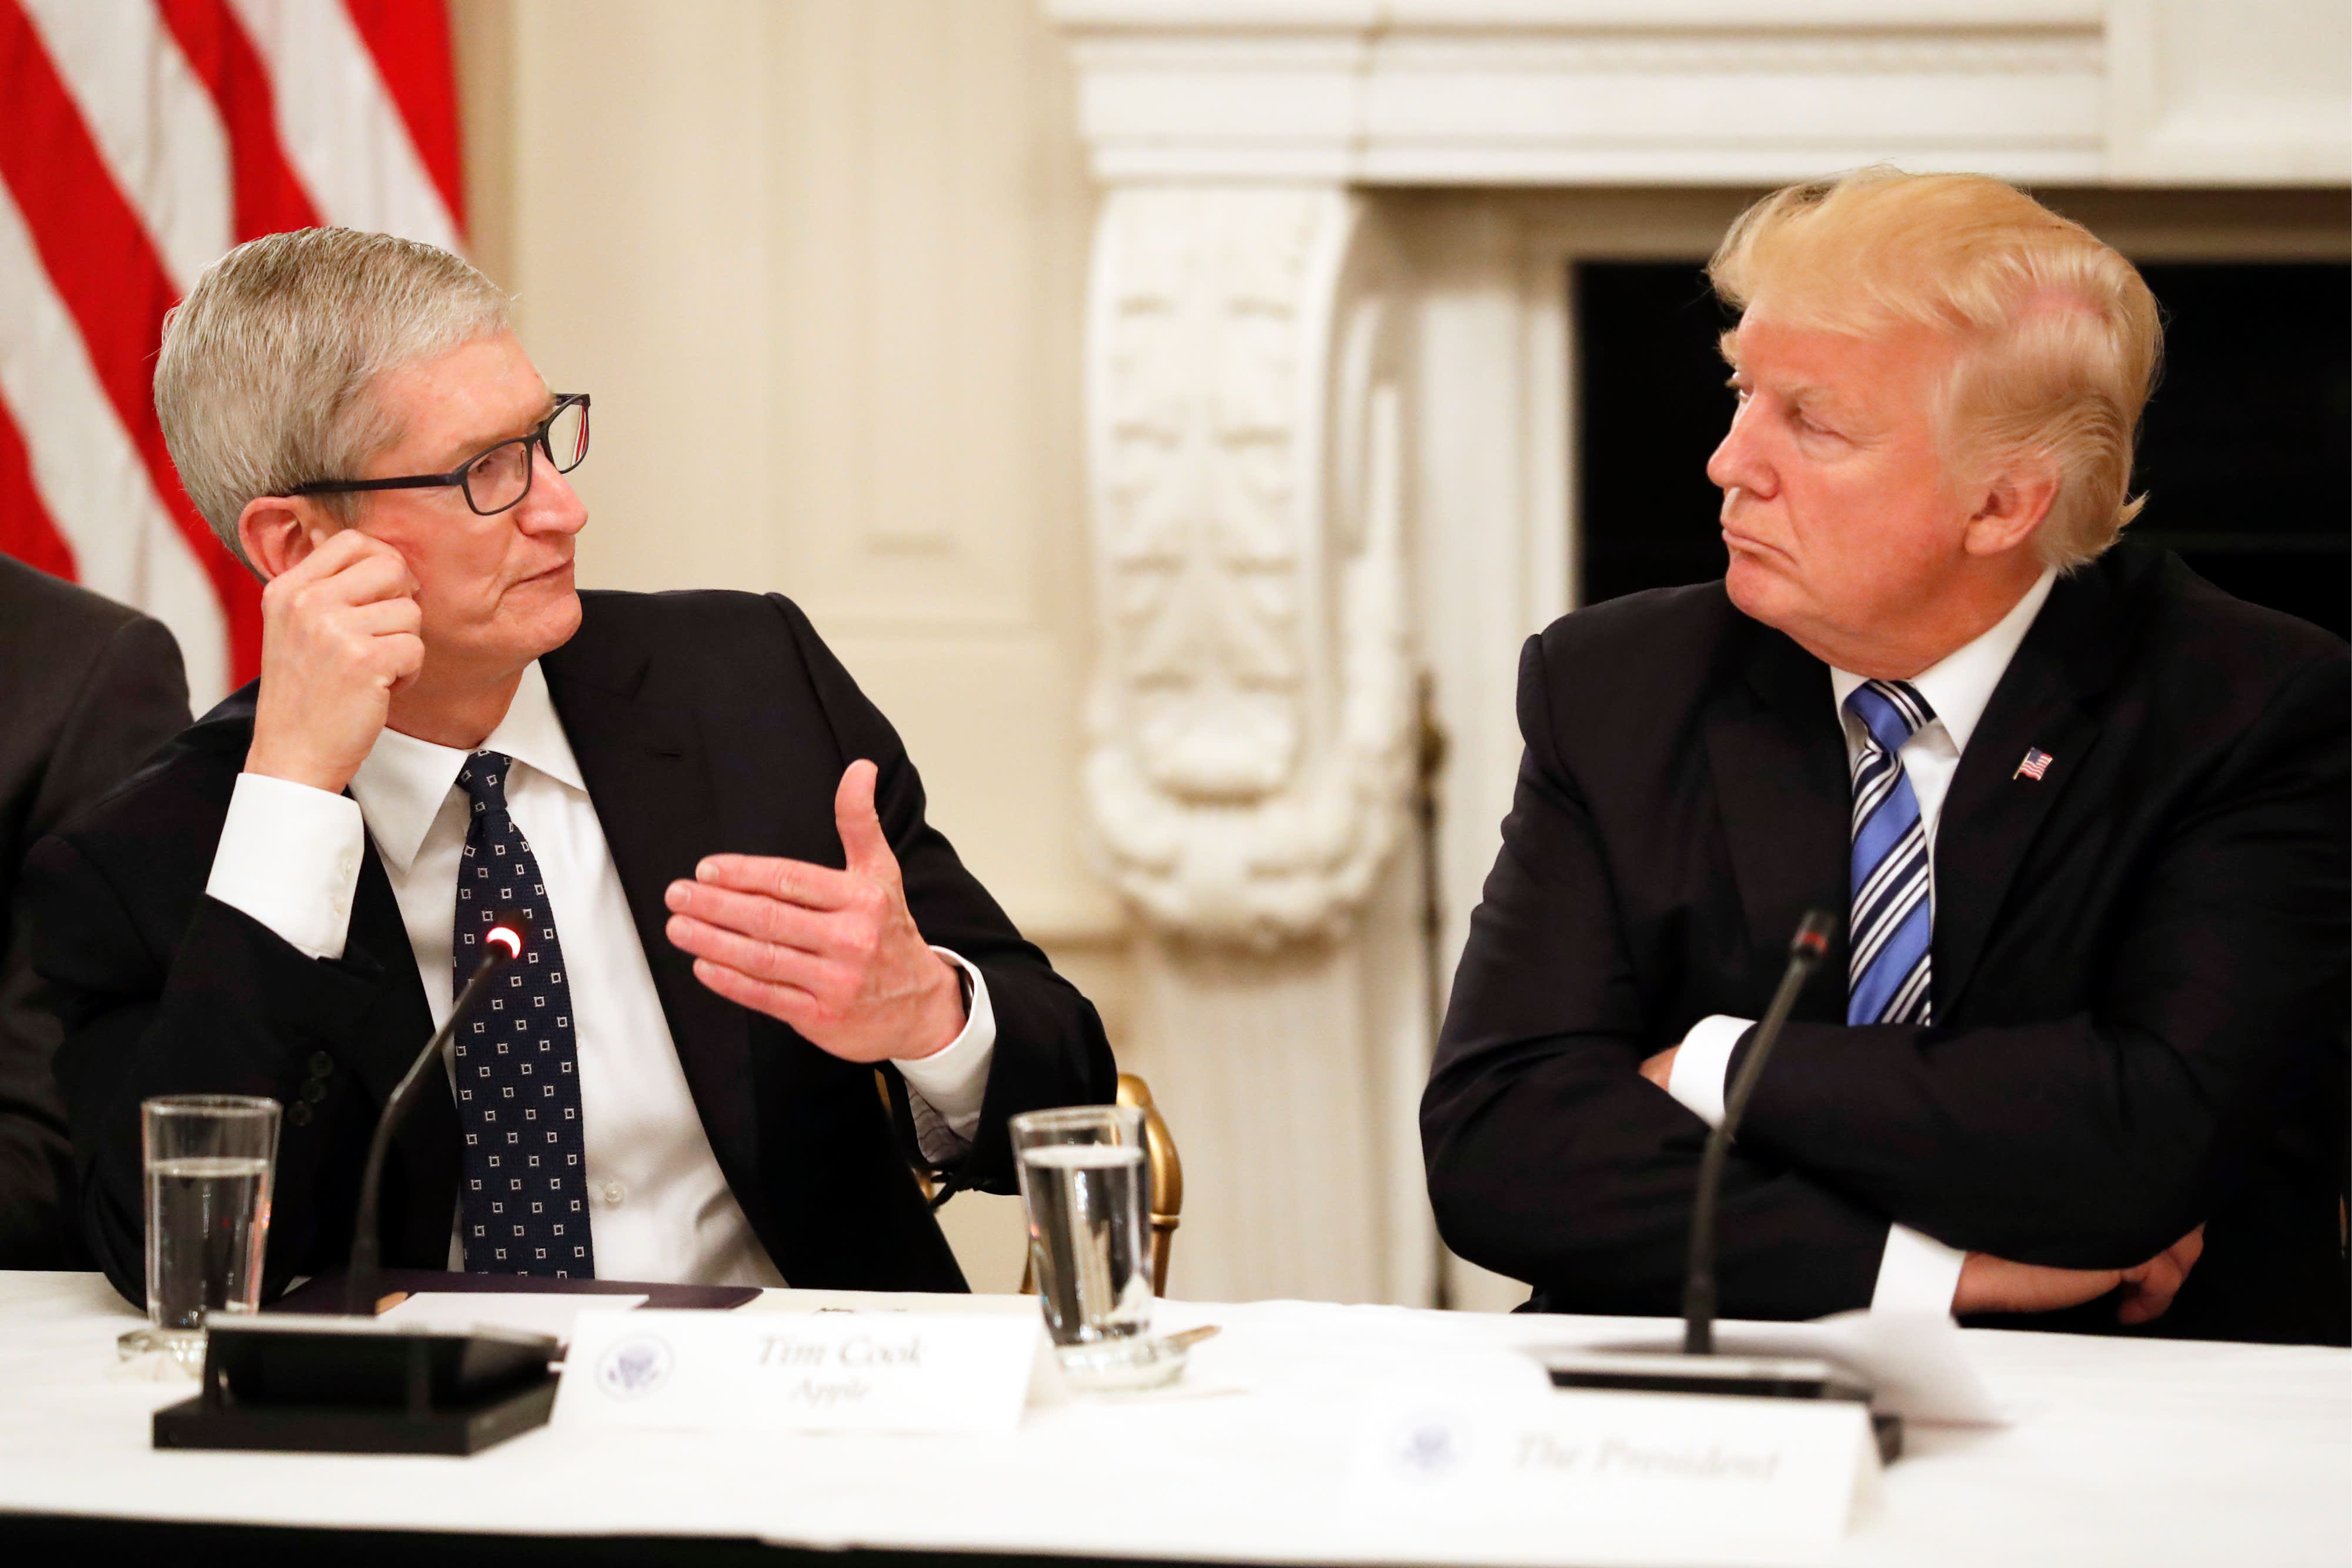 krydstogt sæt ind grill Apple CEO Tim Cook has cultivated a close relationship with Trump